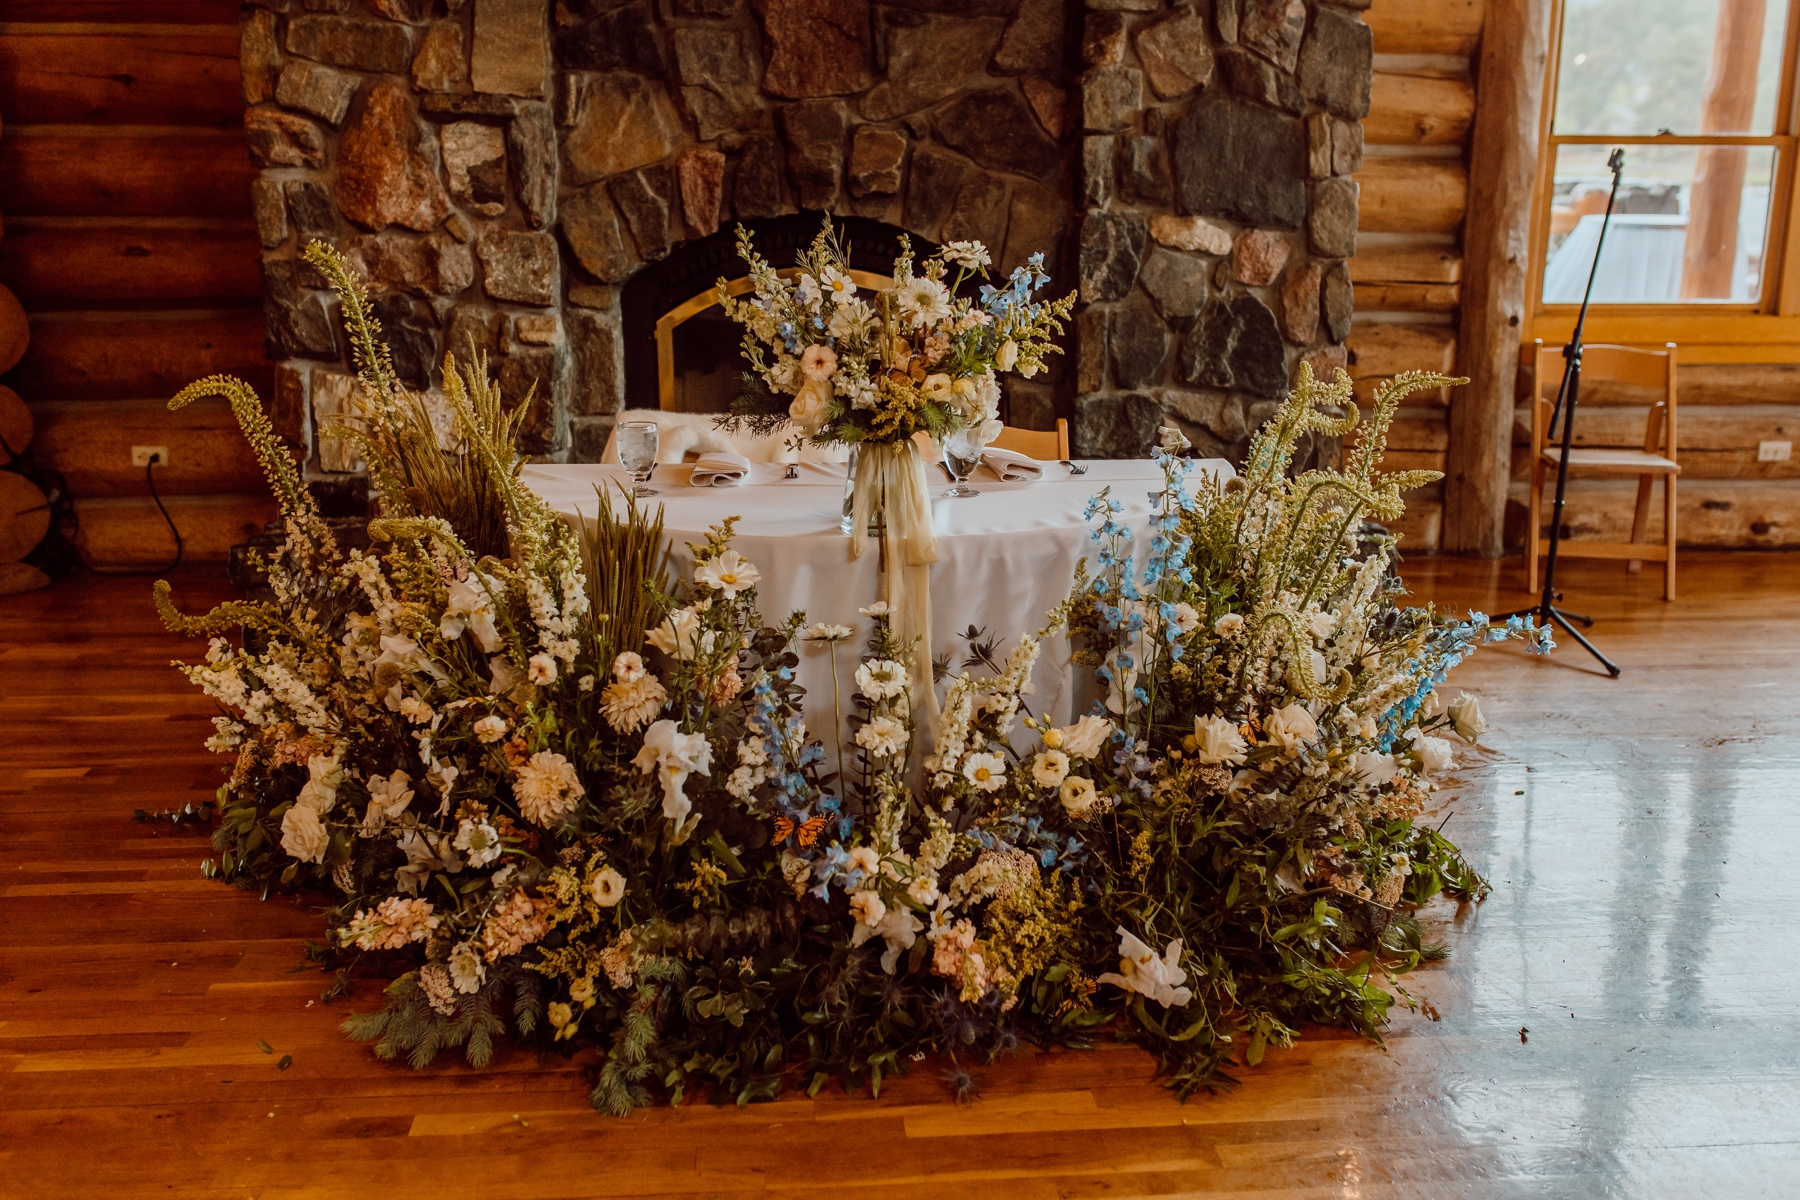 Wildflower arrangements in front of sweetheart table at Evergreen Lake House